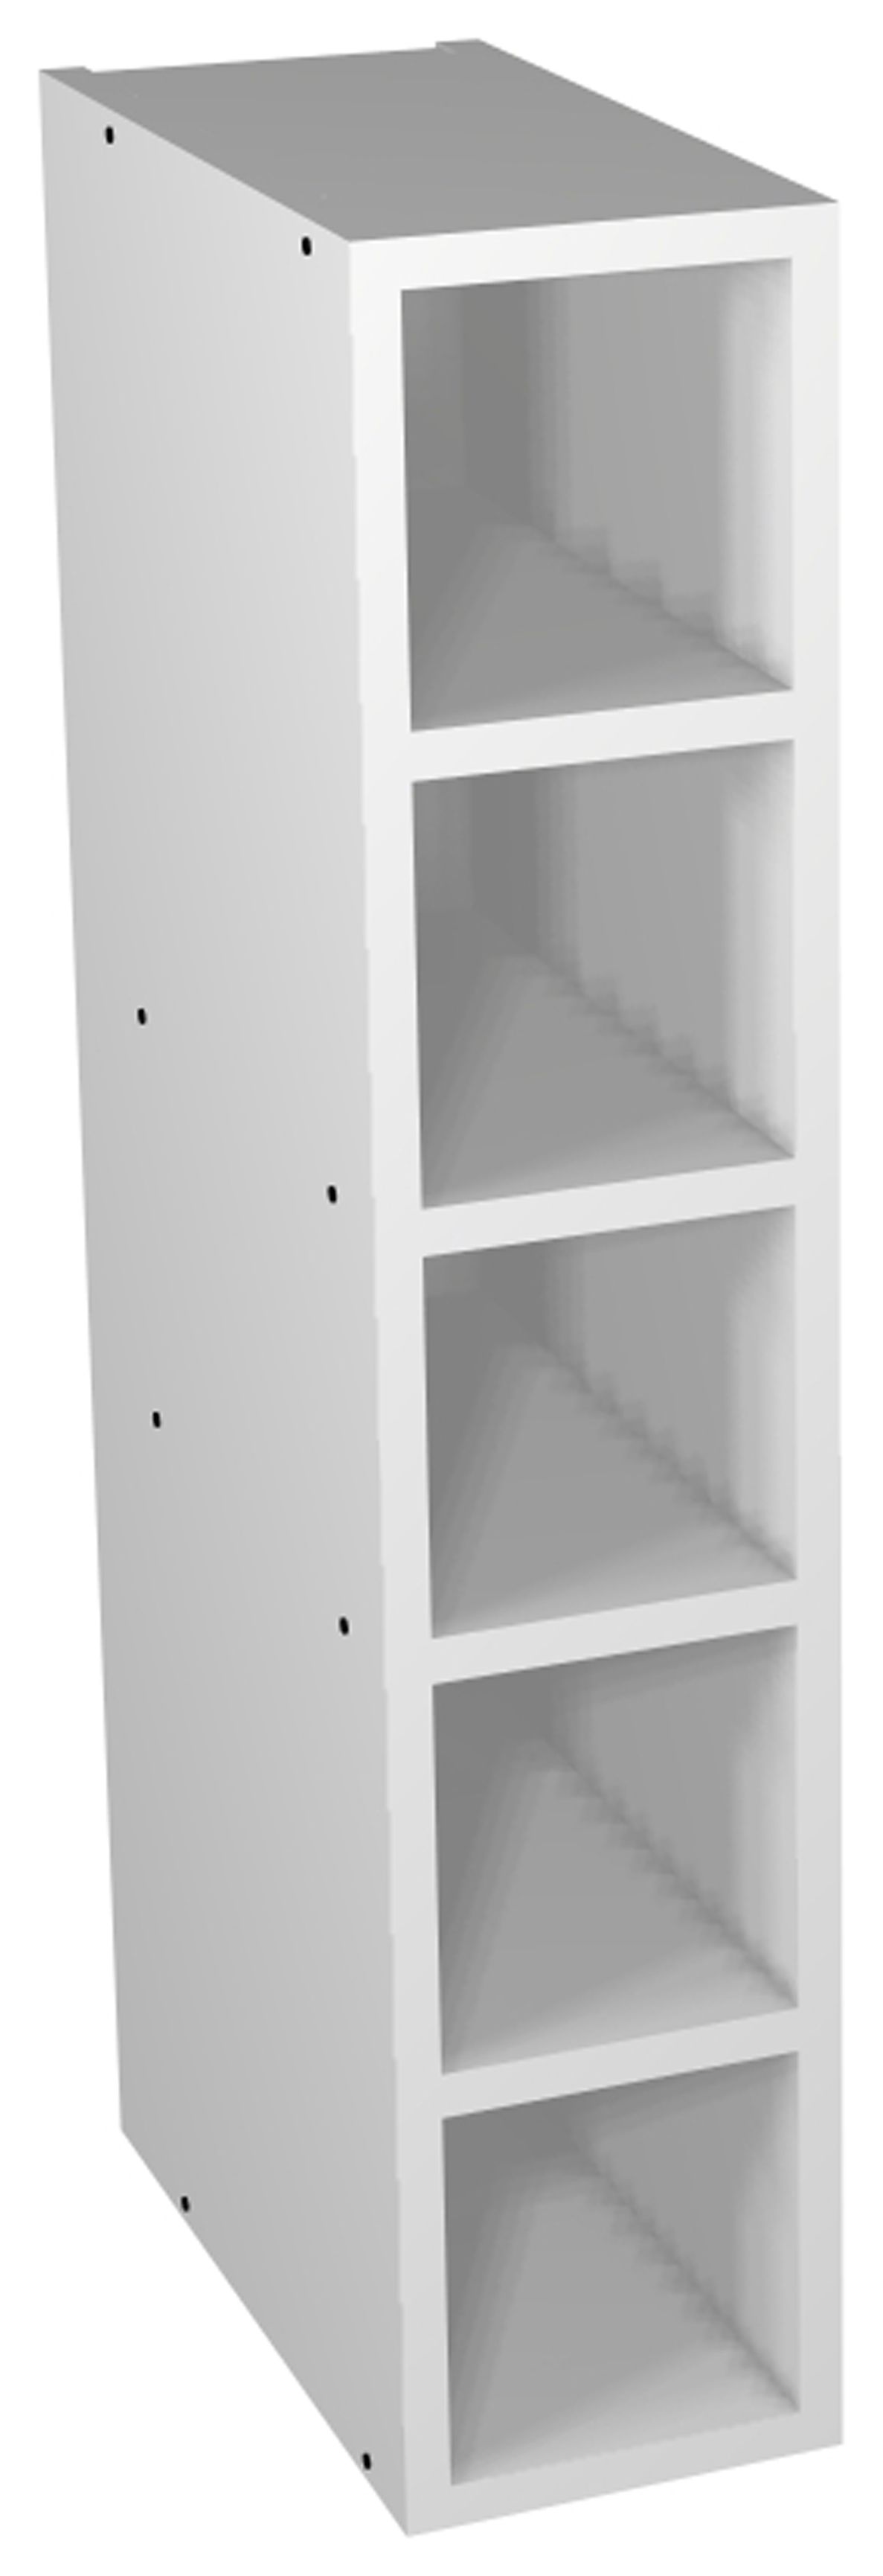 Image of Wickes Fitted Furniture White Gloss Base/Wall Towel Storage Unit - 150 x 735mm